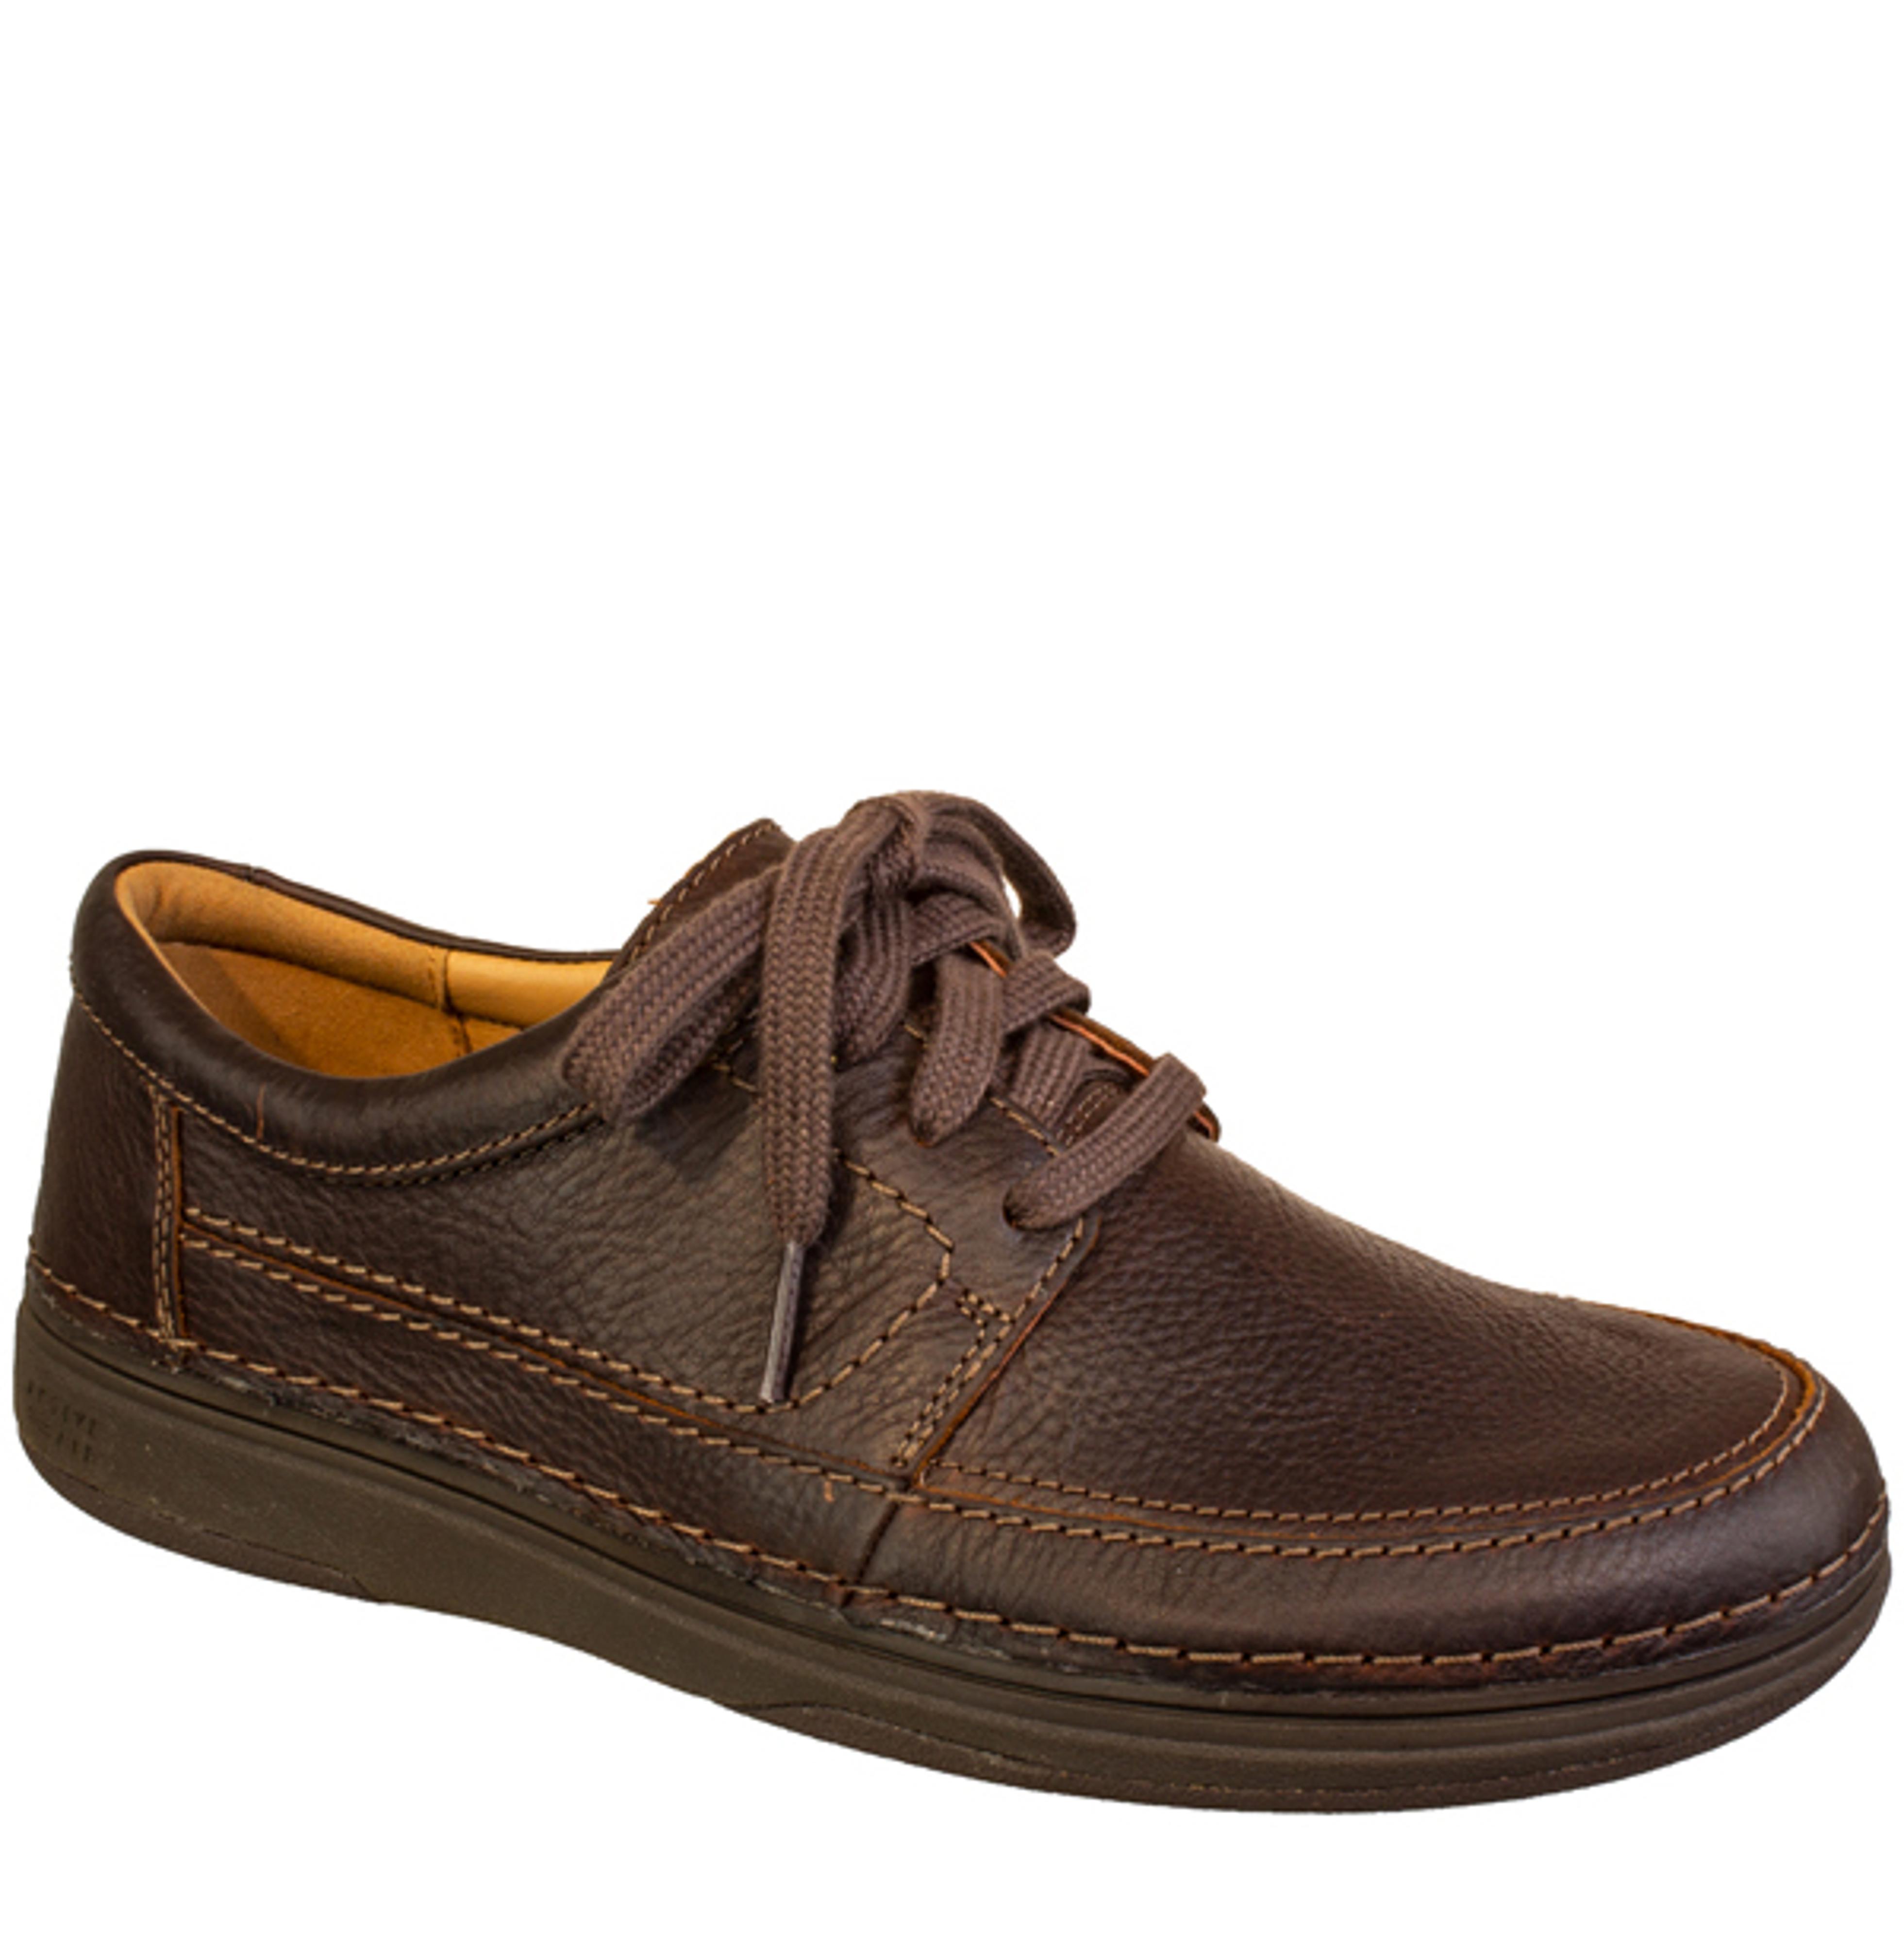 NATURE 5 LO DARK BROWN | Tops For Shoes